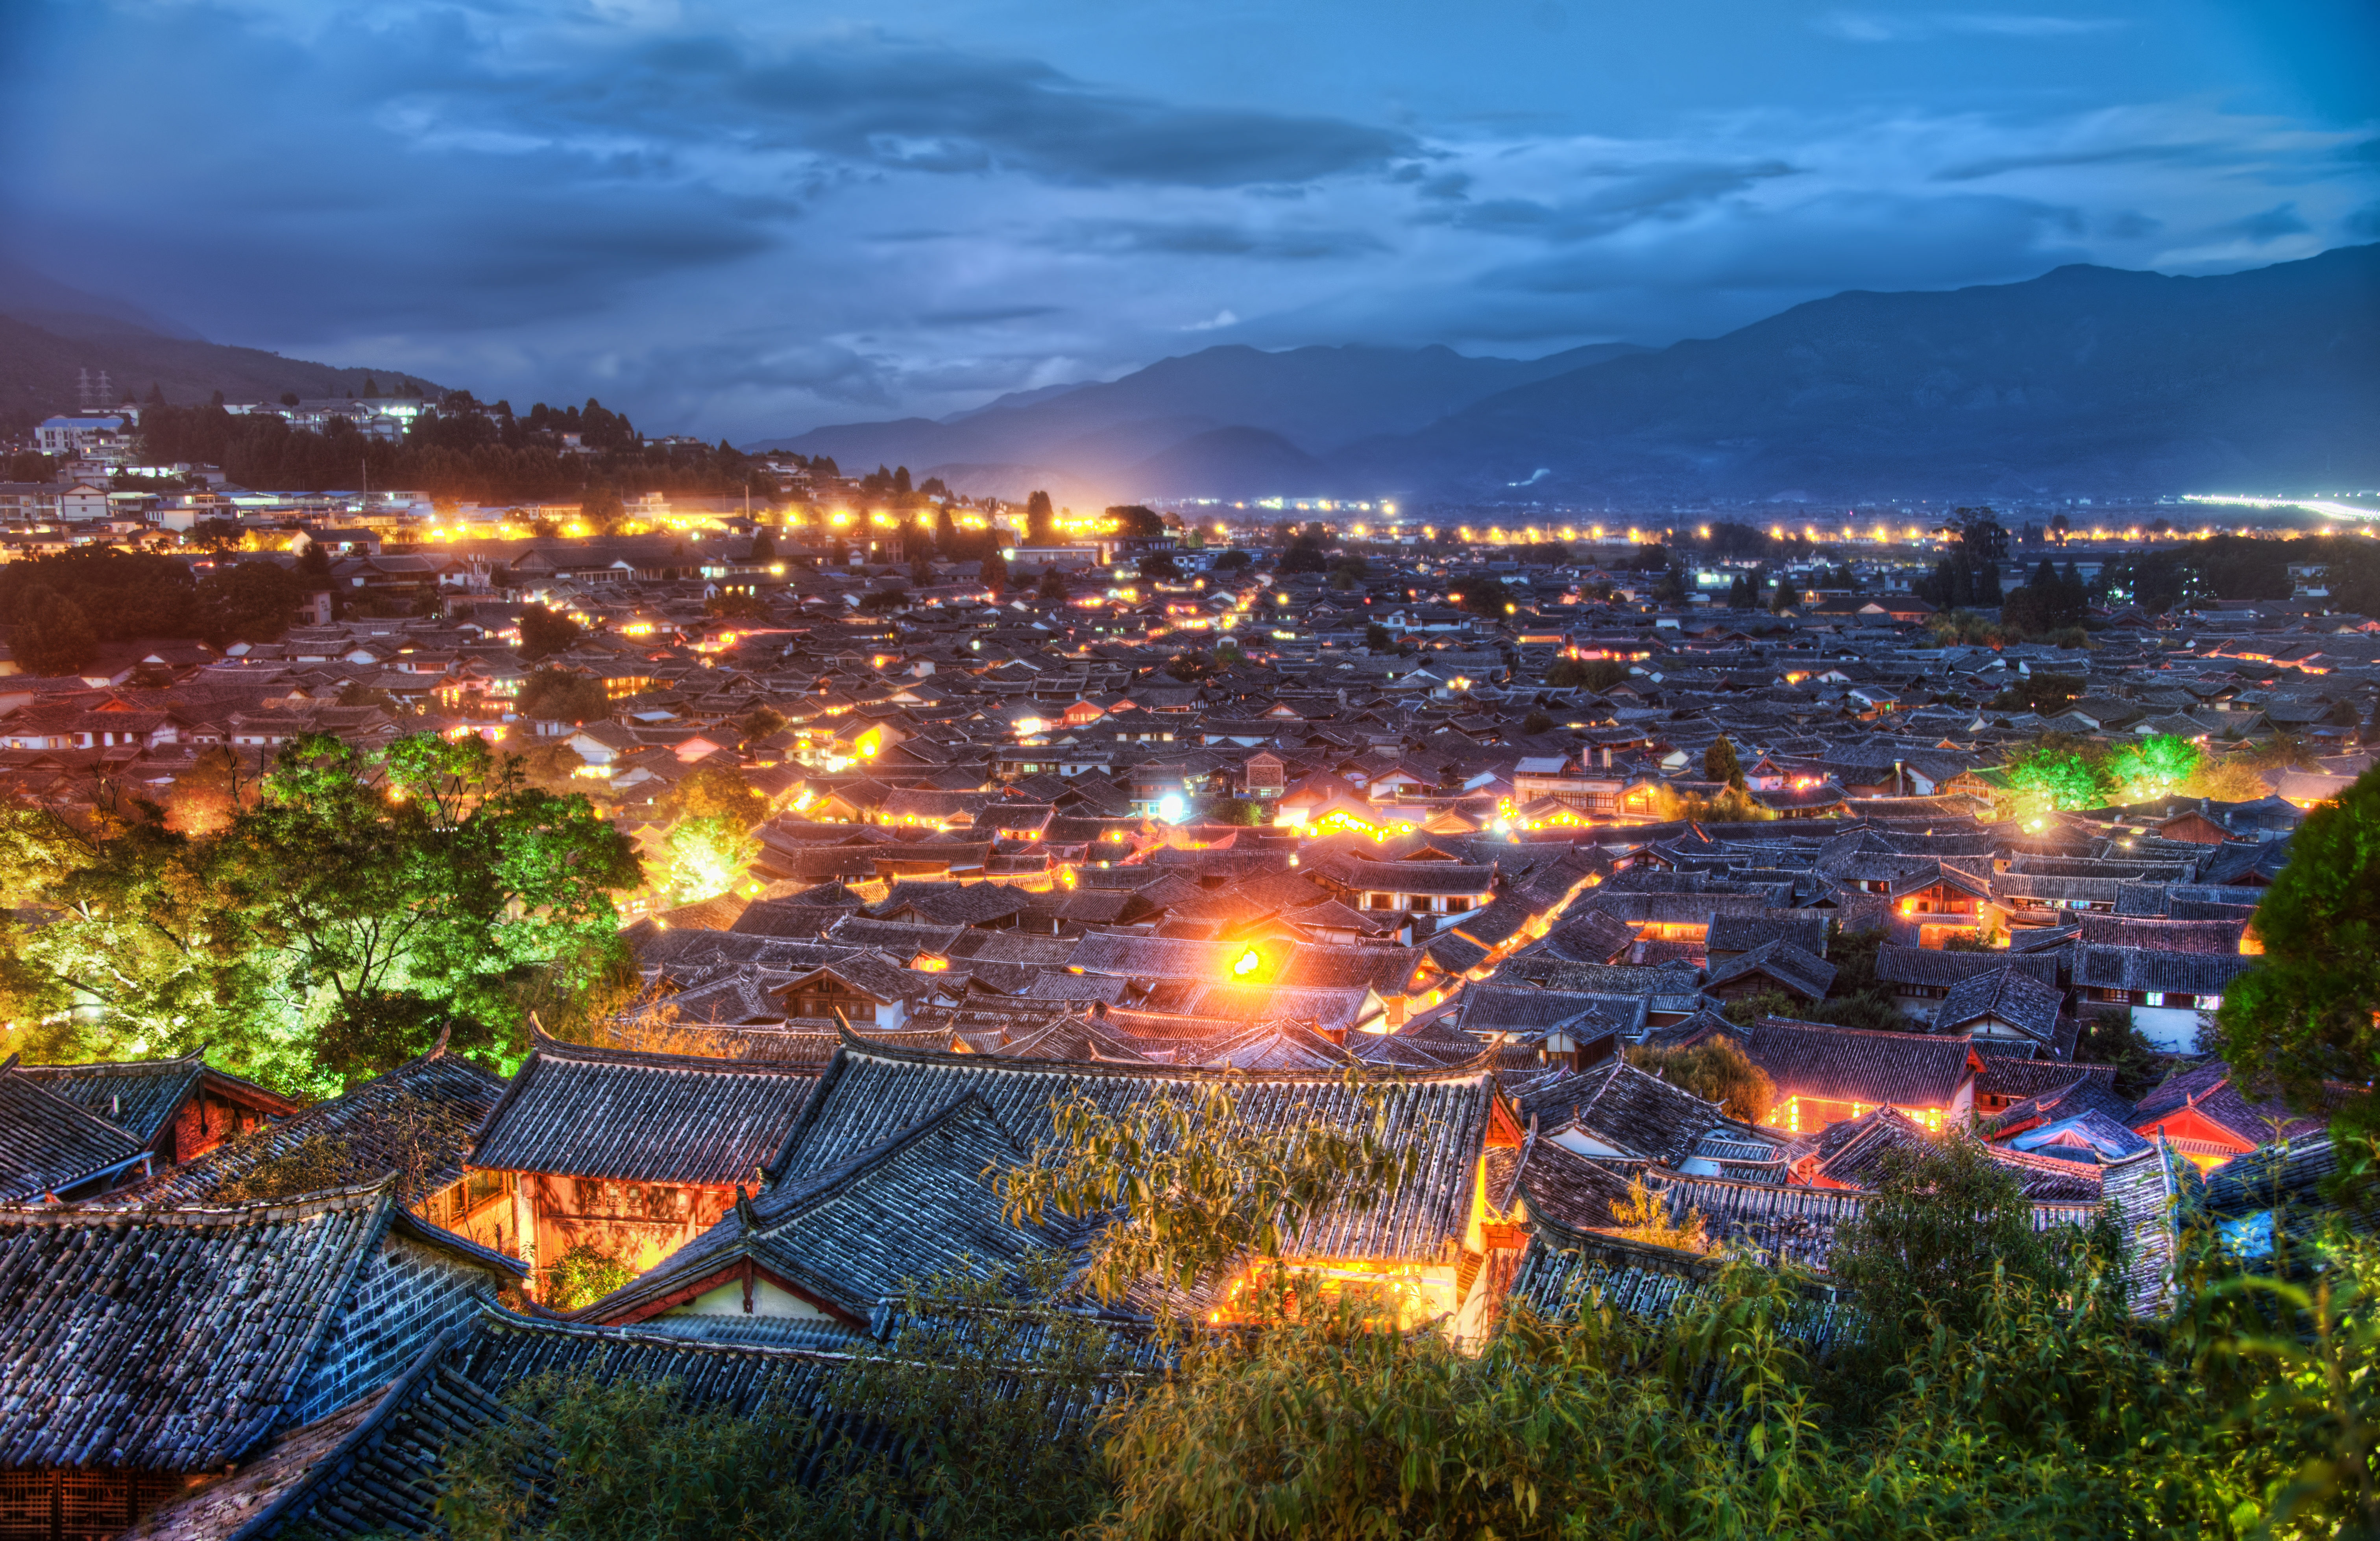 The Village of Lijiang by Trey Ratcliff